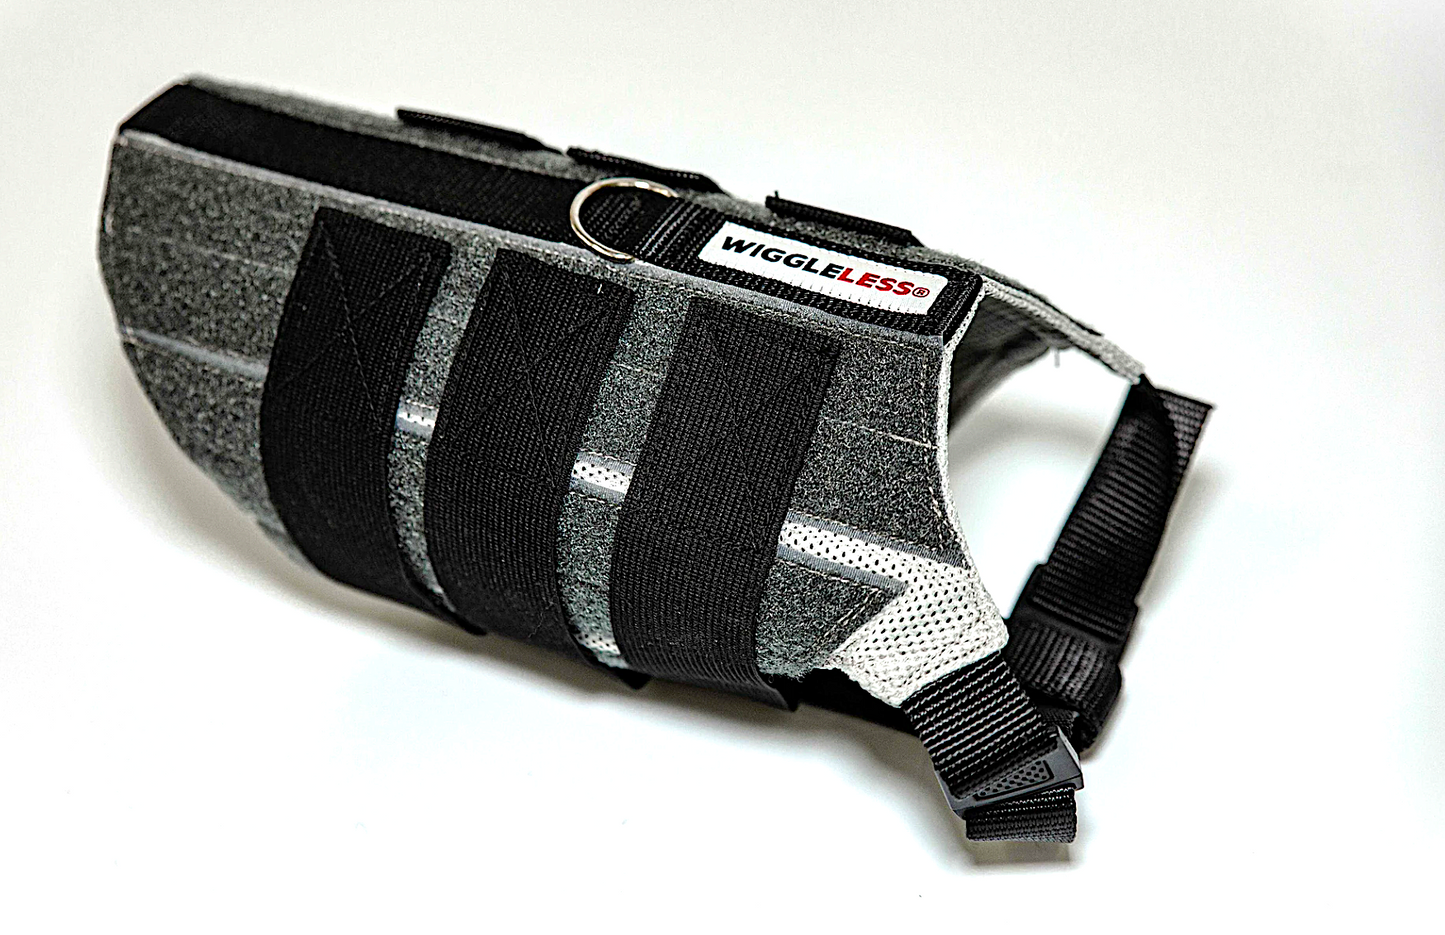 WIGGLELESS DOG BACK BRACE: provides stability and pain relief